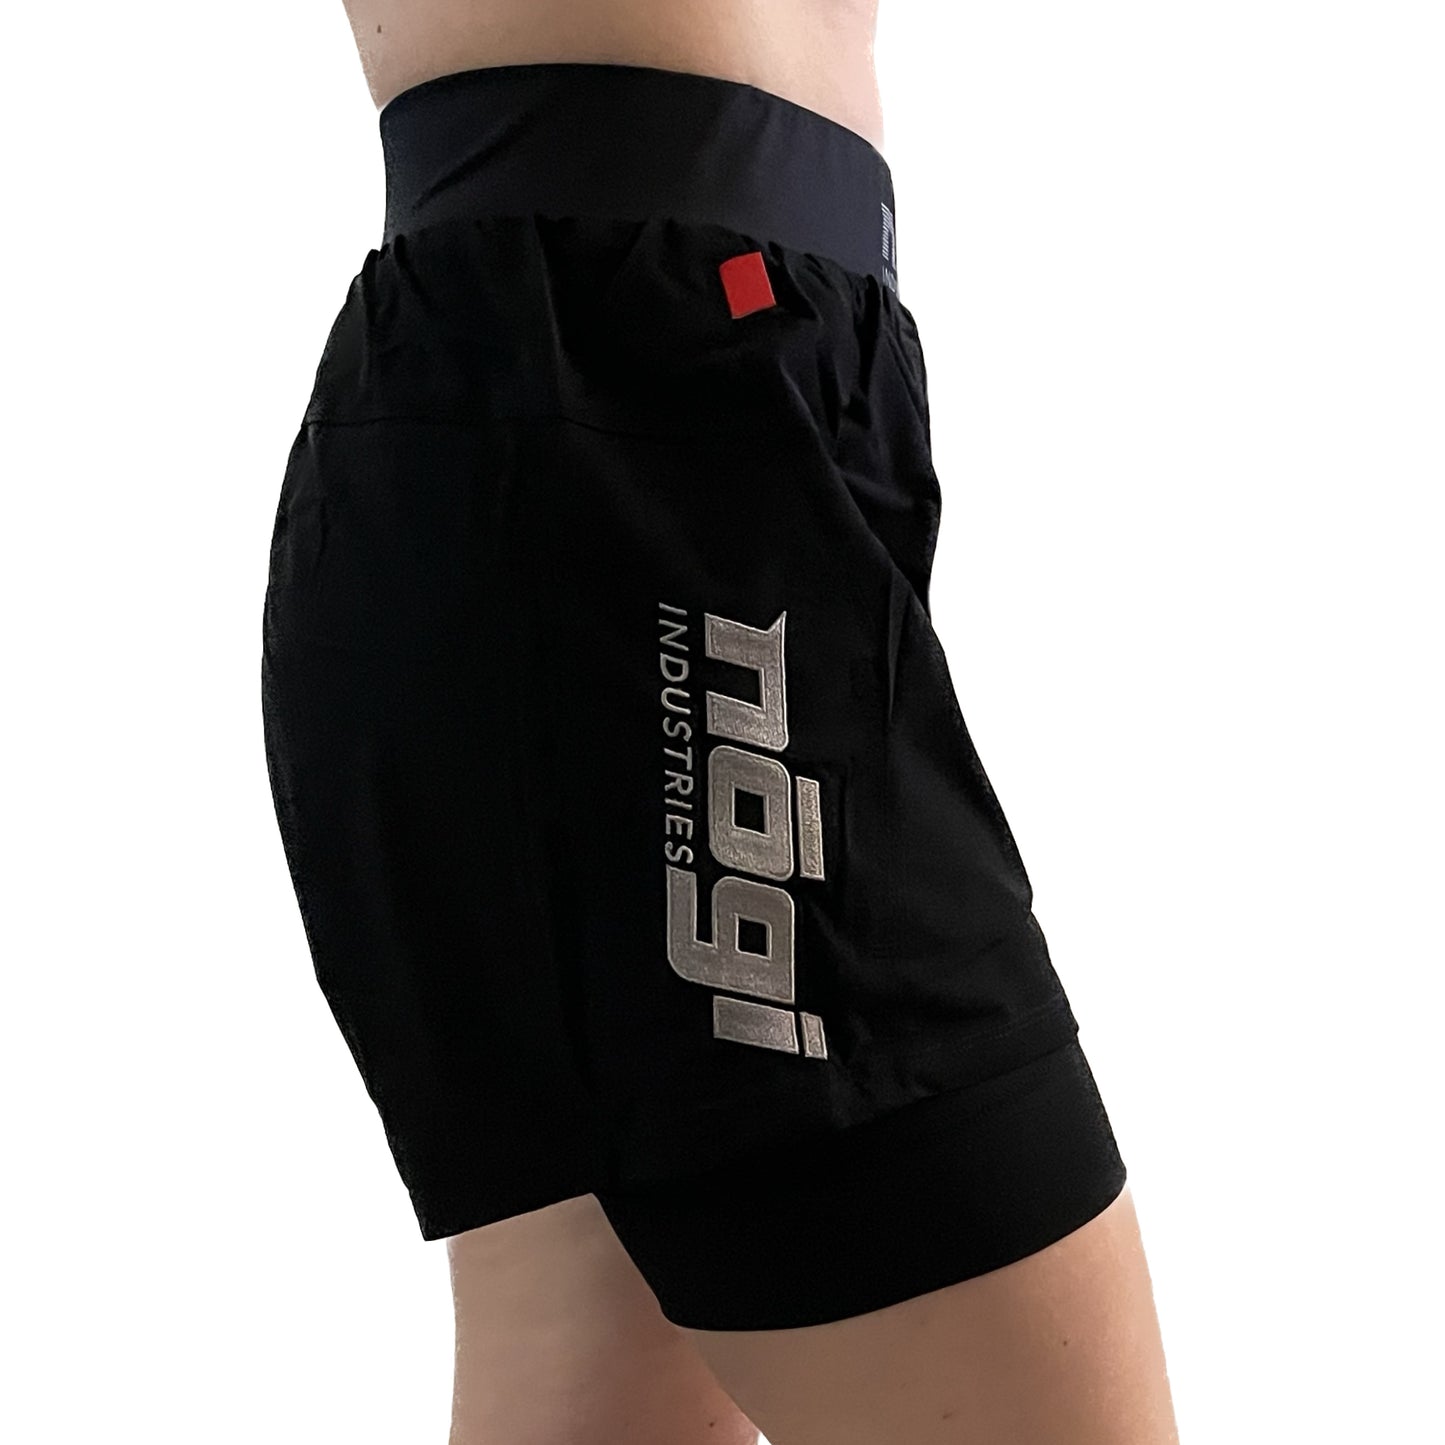 WOMENS Ghost 5" Inseam Premium Lined Grappling Shorts - Obsidian Black